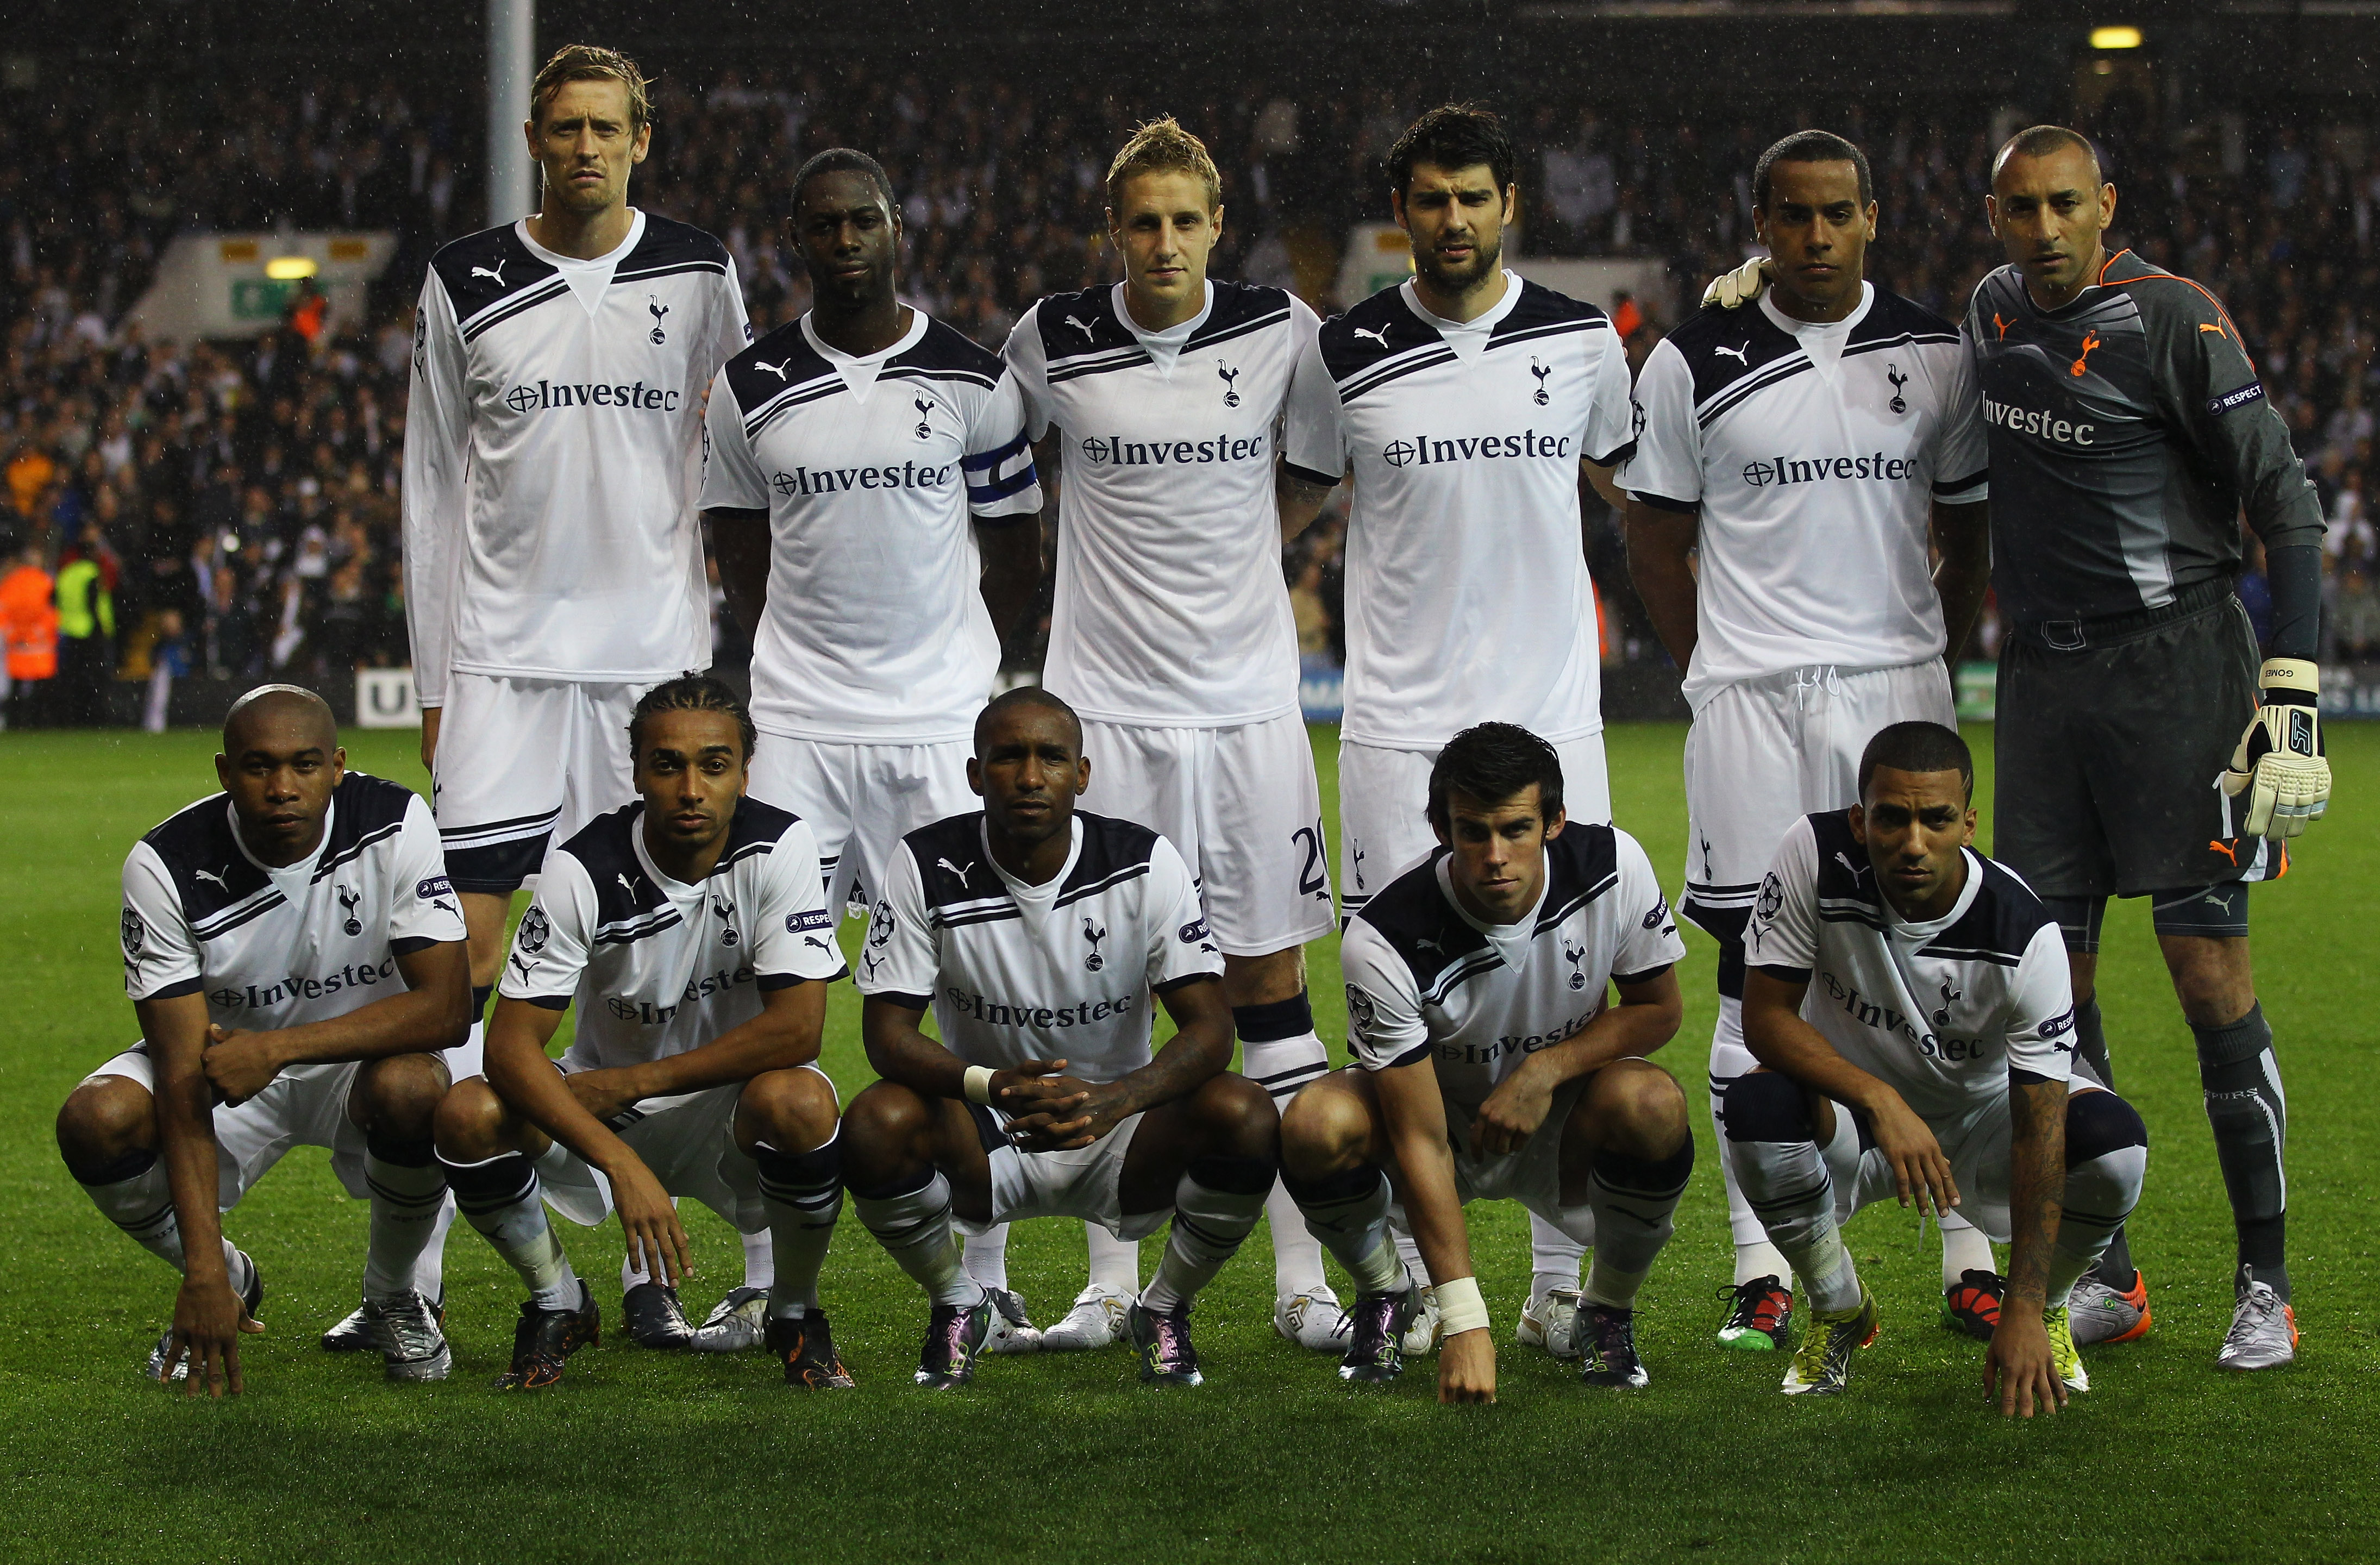 LONDON, ENGLAND - AUGUST 25:  Tottenham Hotspur line up prior to the UEFA Champions League play-off second leg match between Tottenham Hotspur and BSC Young Boys at White Hart Lane on August 25, 2010 in London, England.  (Photo by Clive Rose/Getty Images)